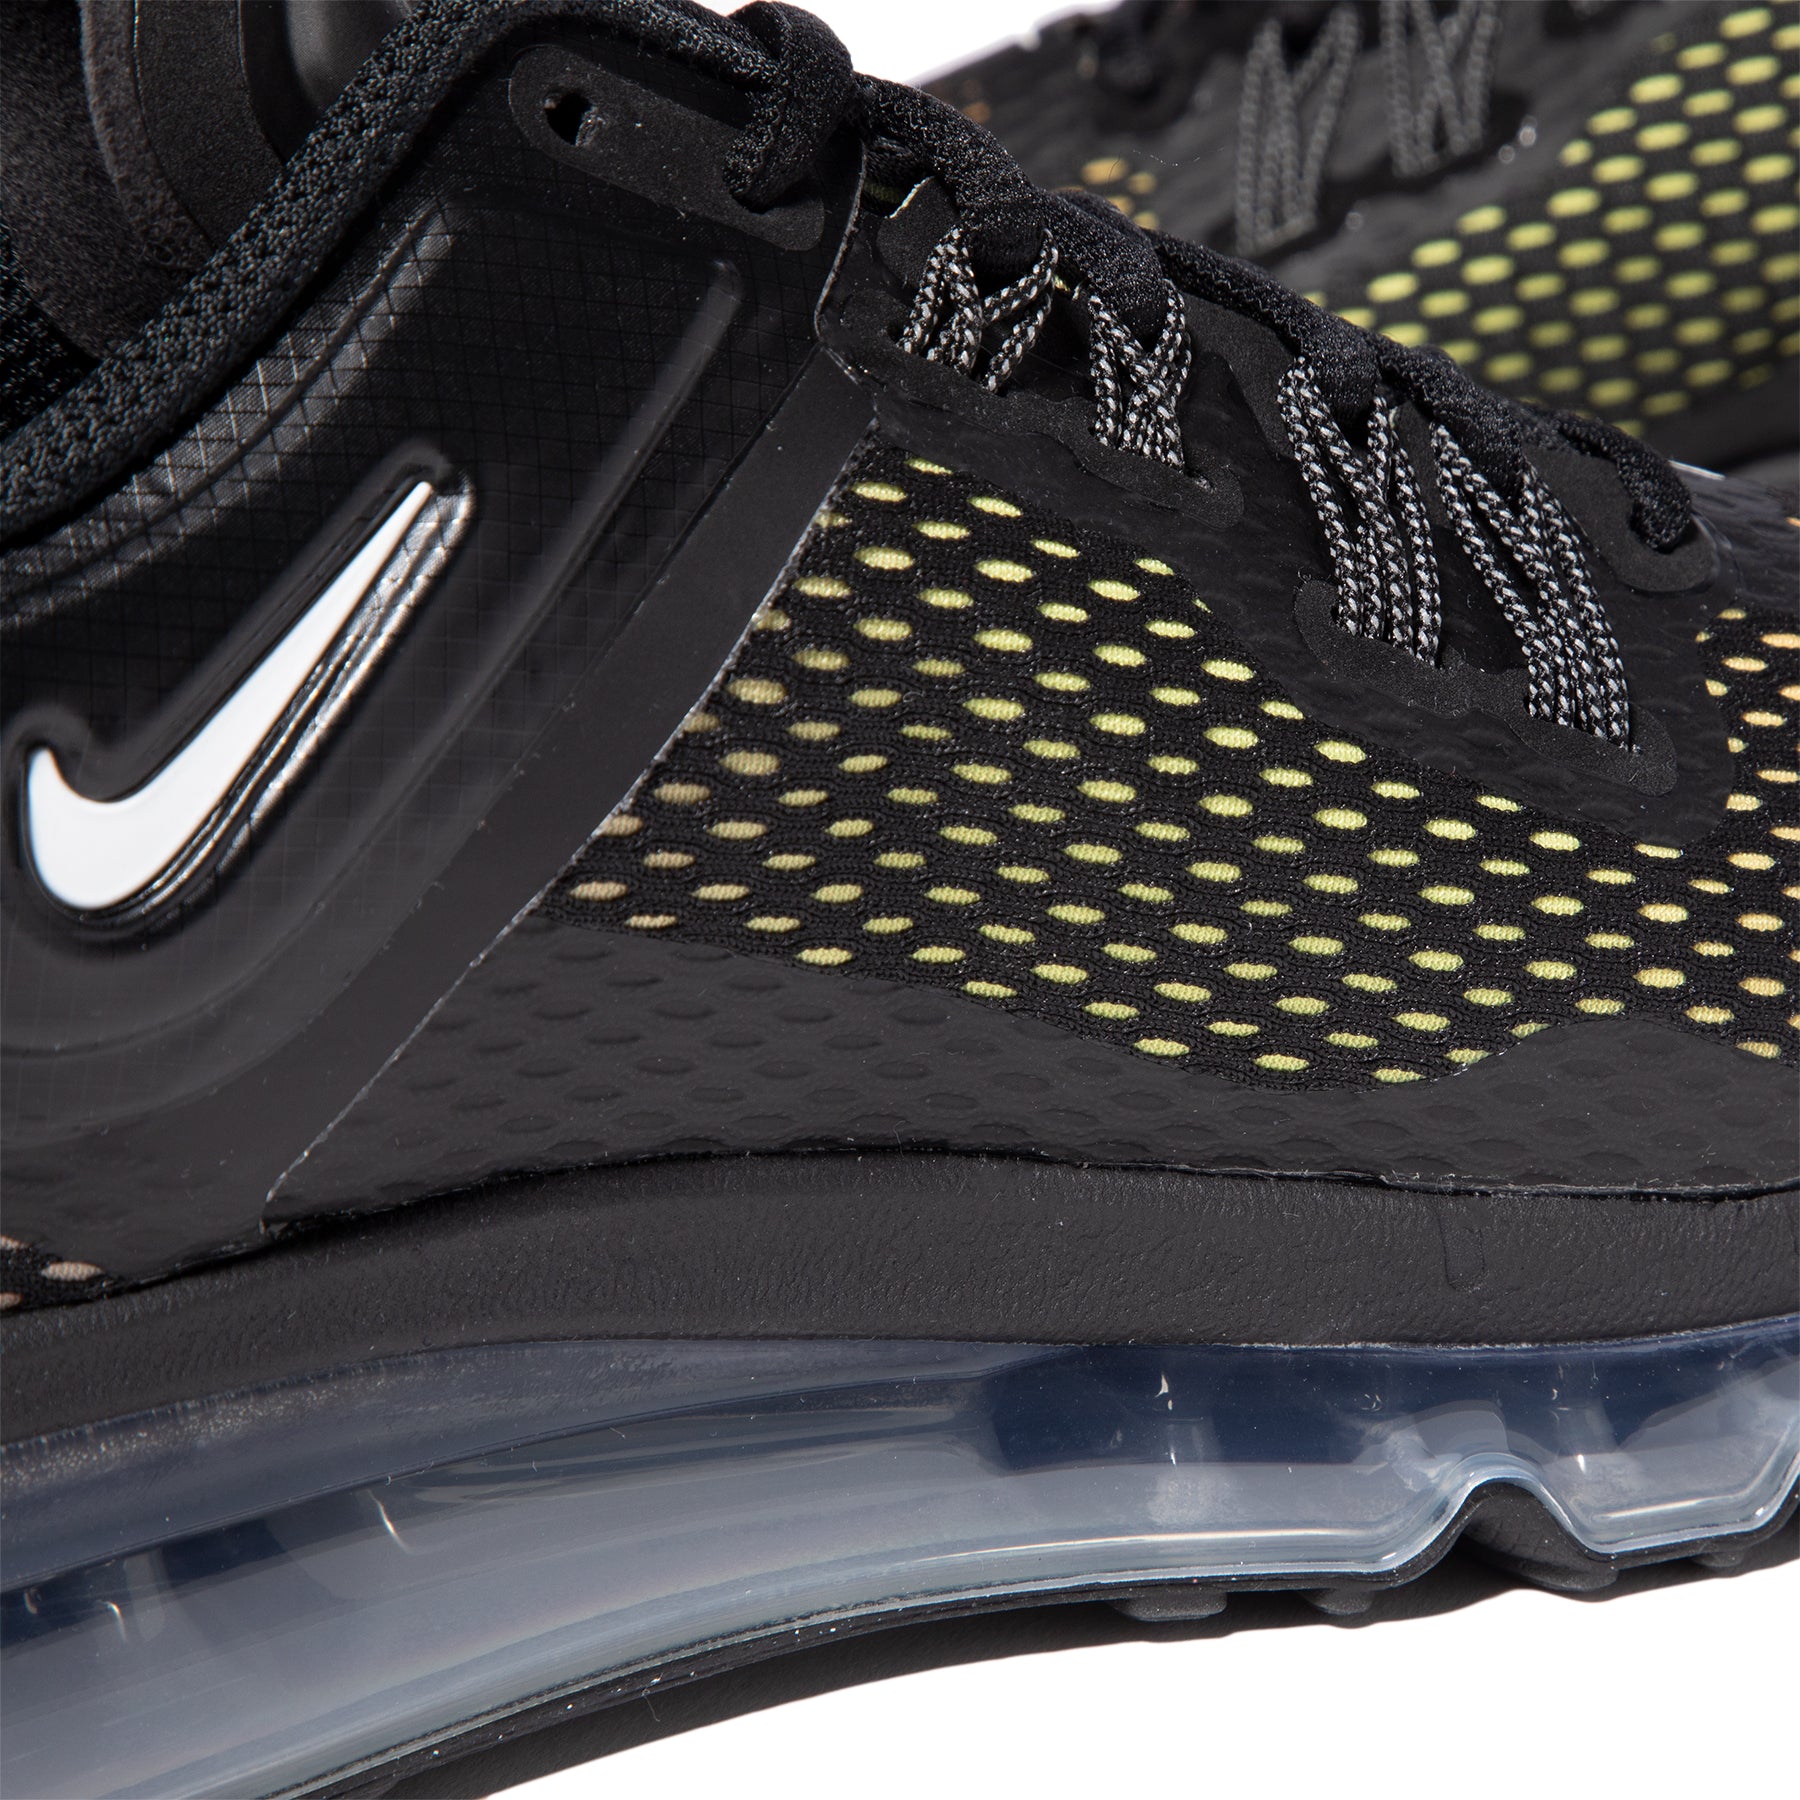 Nike's Air Max 2013 is coming back